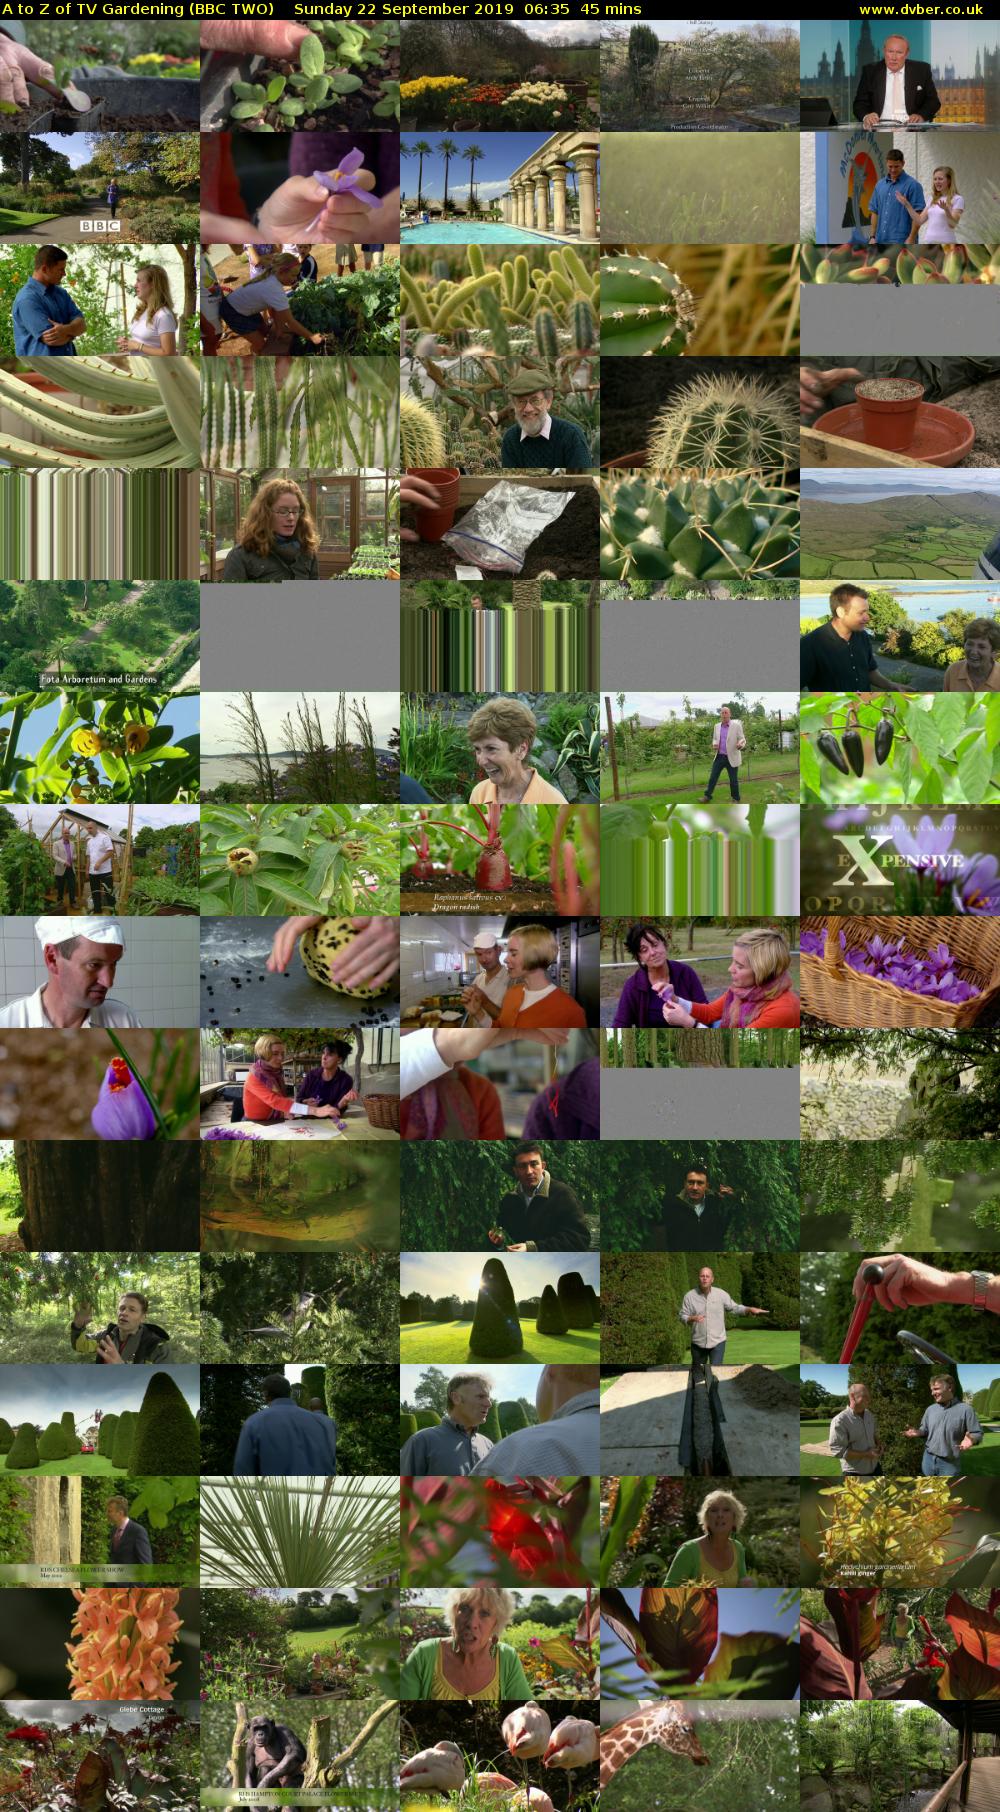 A to Z of TV Gardening (BBC TWO) Sunday 22 September 2019 06:35 - 07:20